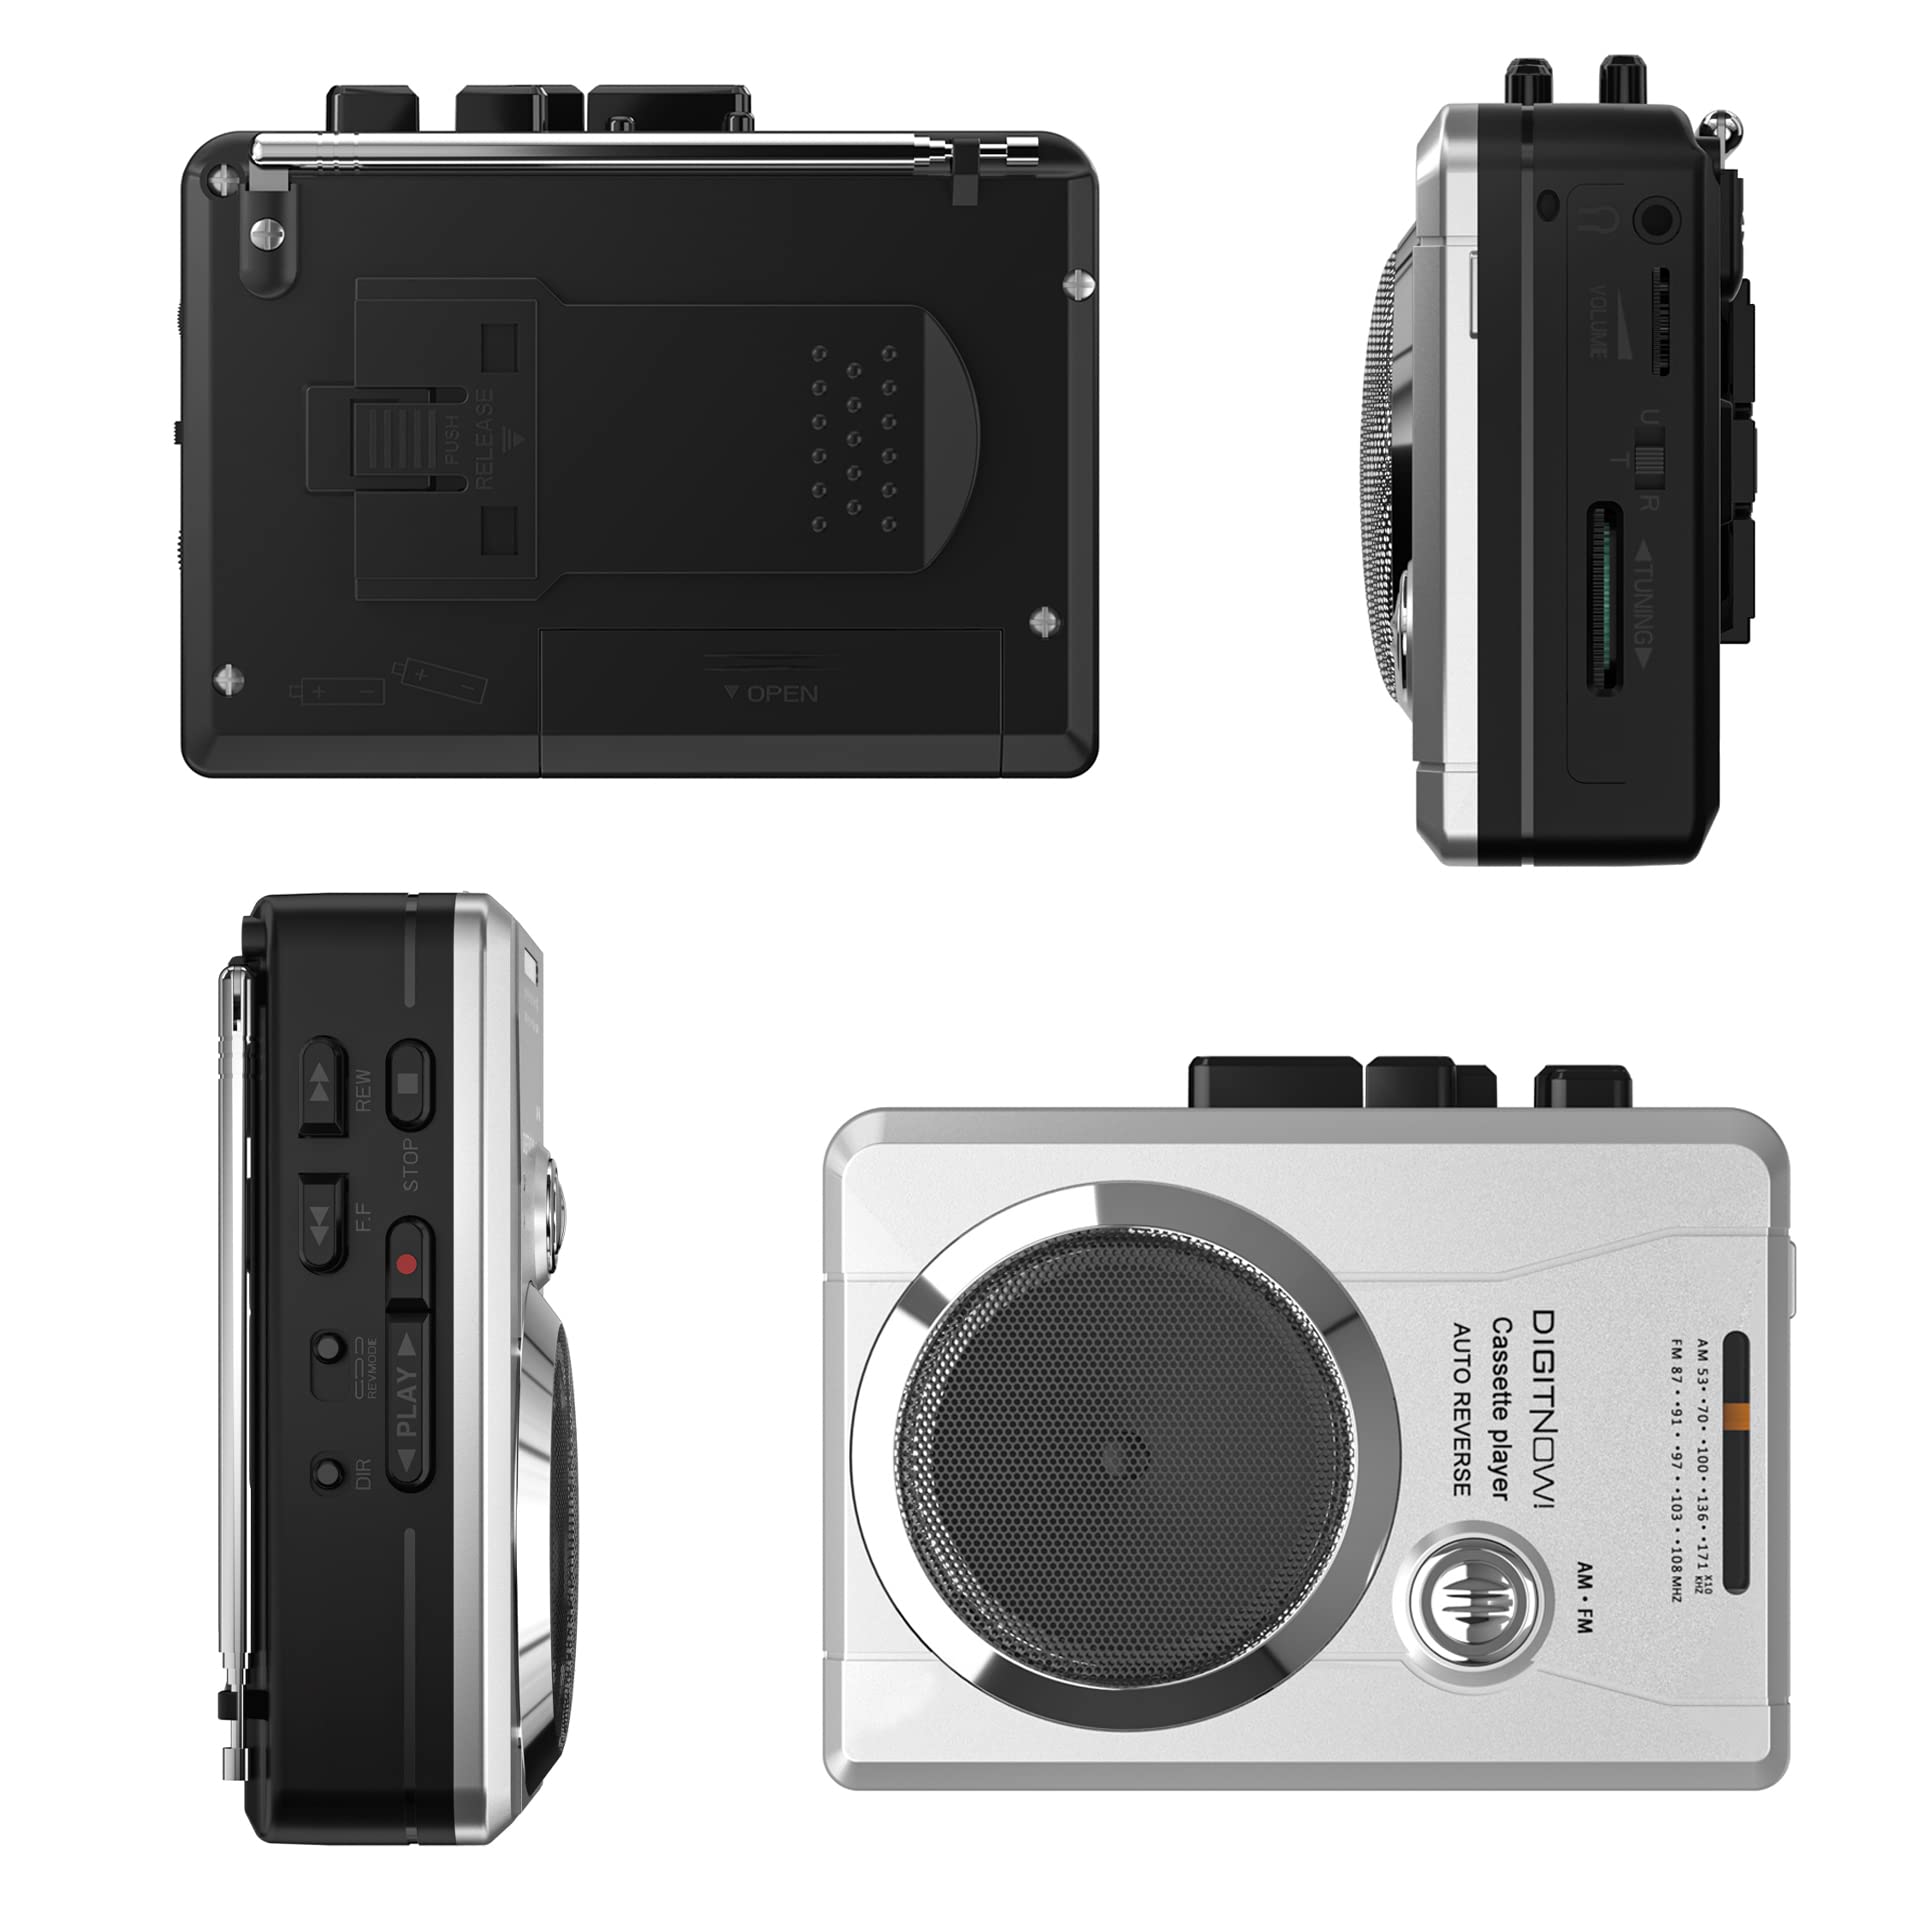 AM/FM Portable Pocket Radio and Voice Audio Cassette Recorder,Personal Audio Walkman Cassette Player with Built-in Speaker and Earphone